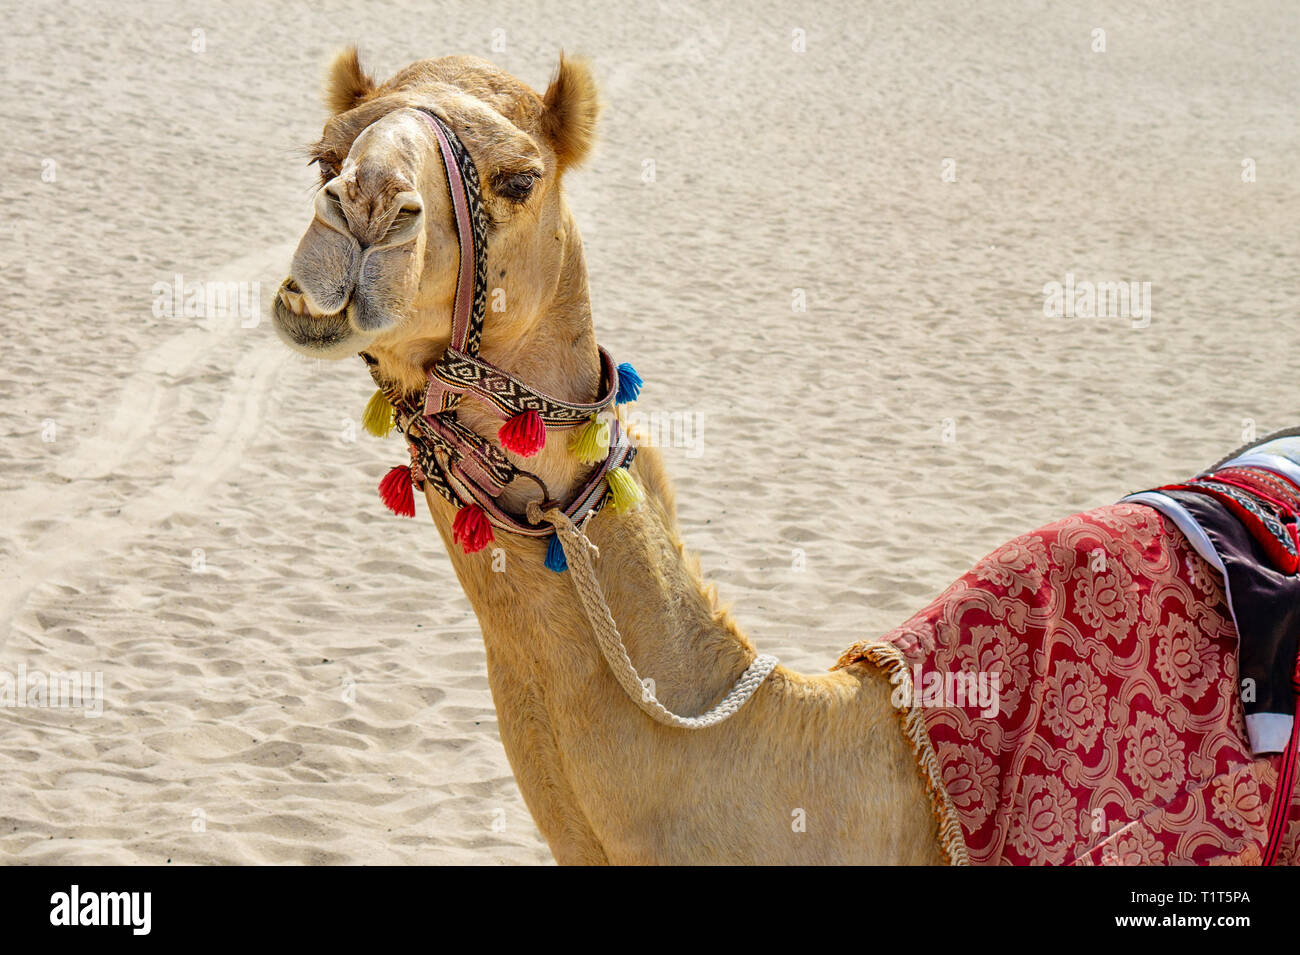 Colorful silly face funny decorated Camel on the sandy background Stock Photo